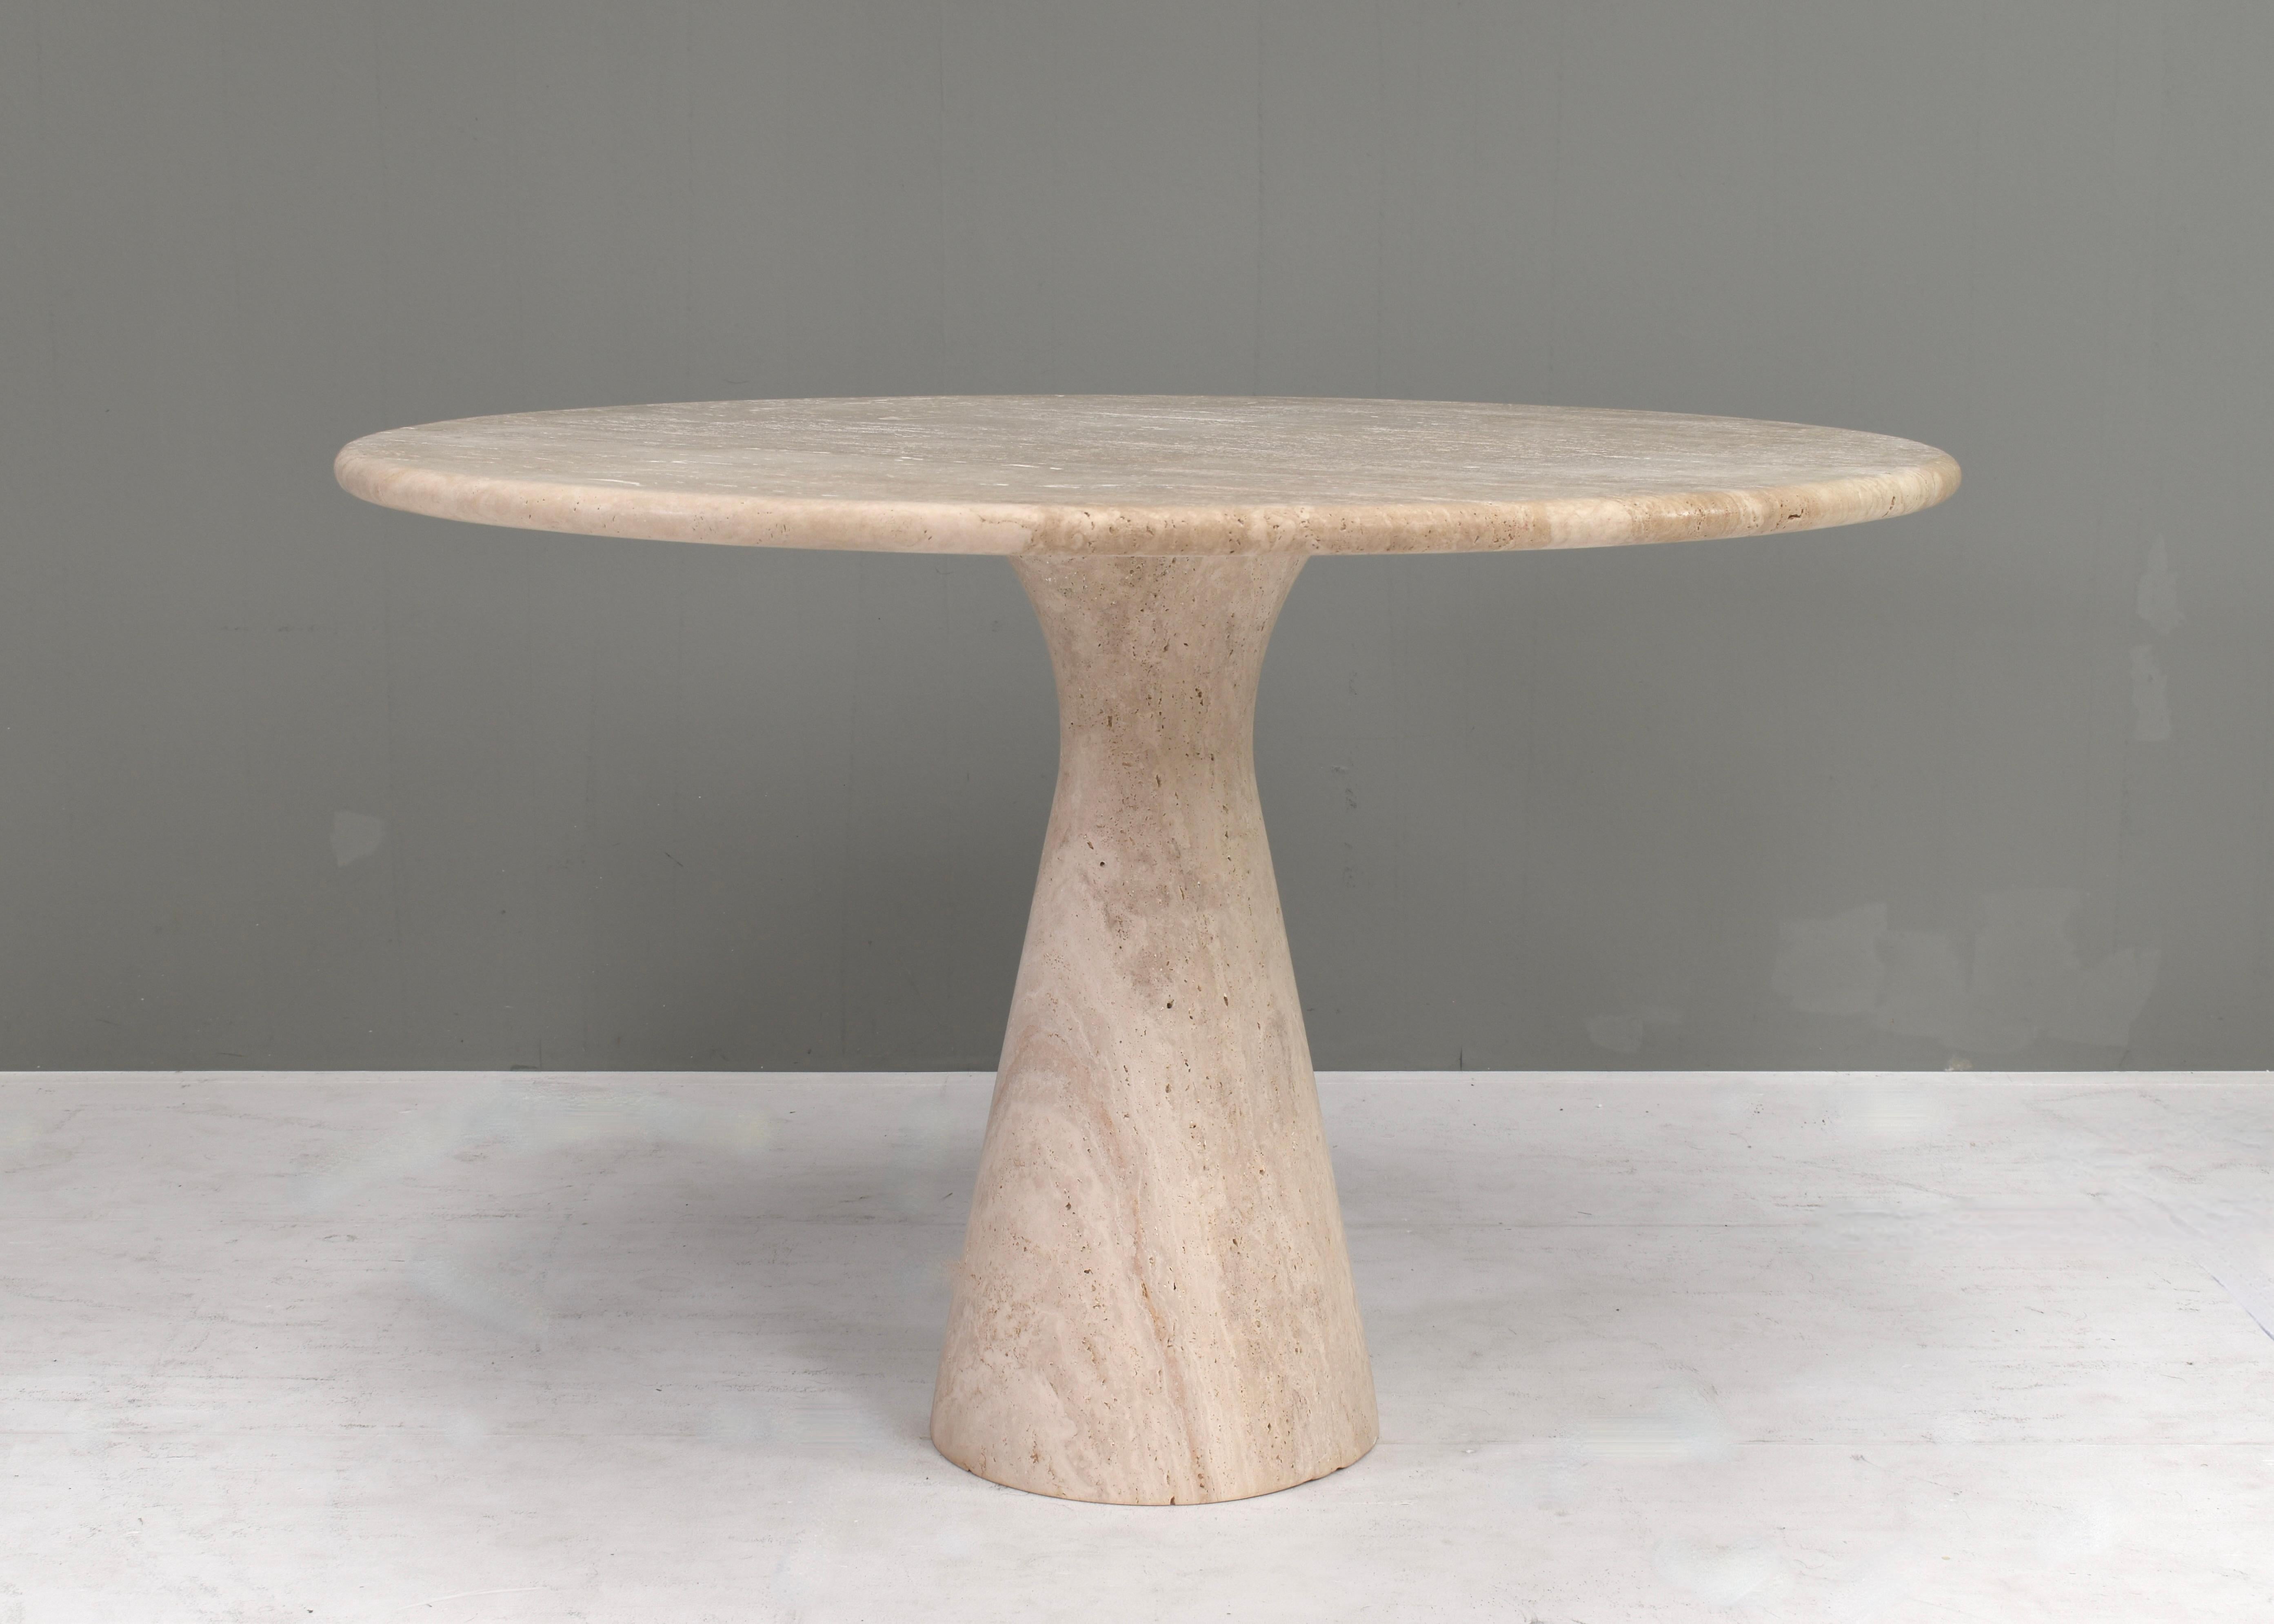 Introducing the Mangiarotti style dining table: a timeless Tribute to elegance and craftsmanship.
Immerse yourself in the world of Angelo Mangiarotti’s iconic designs with our exquisite Round Travertine Dining Table. Inspired by the legendary